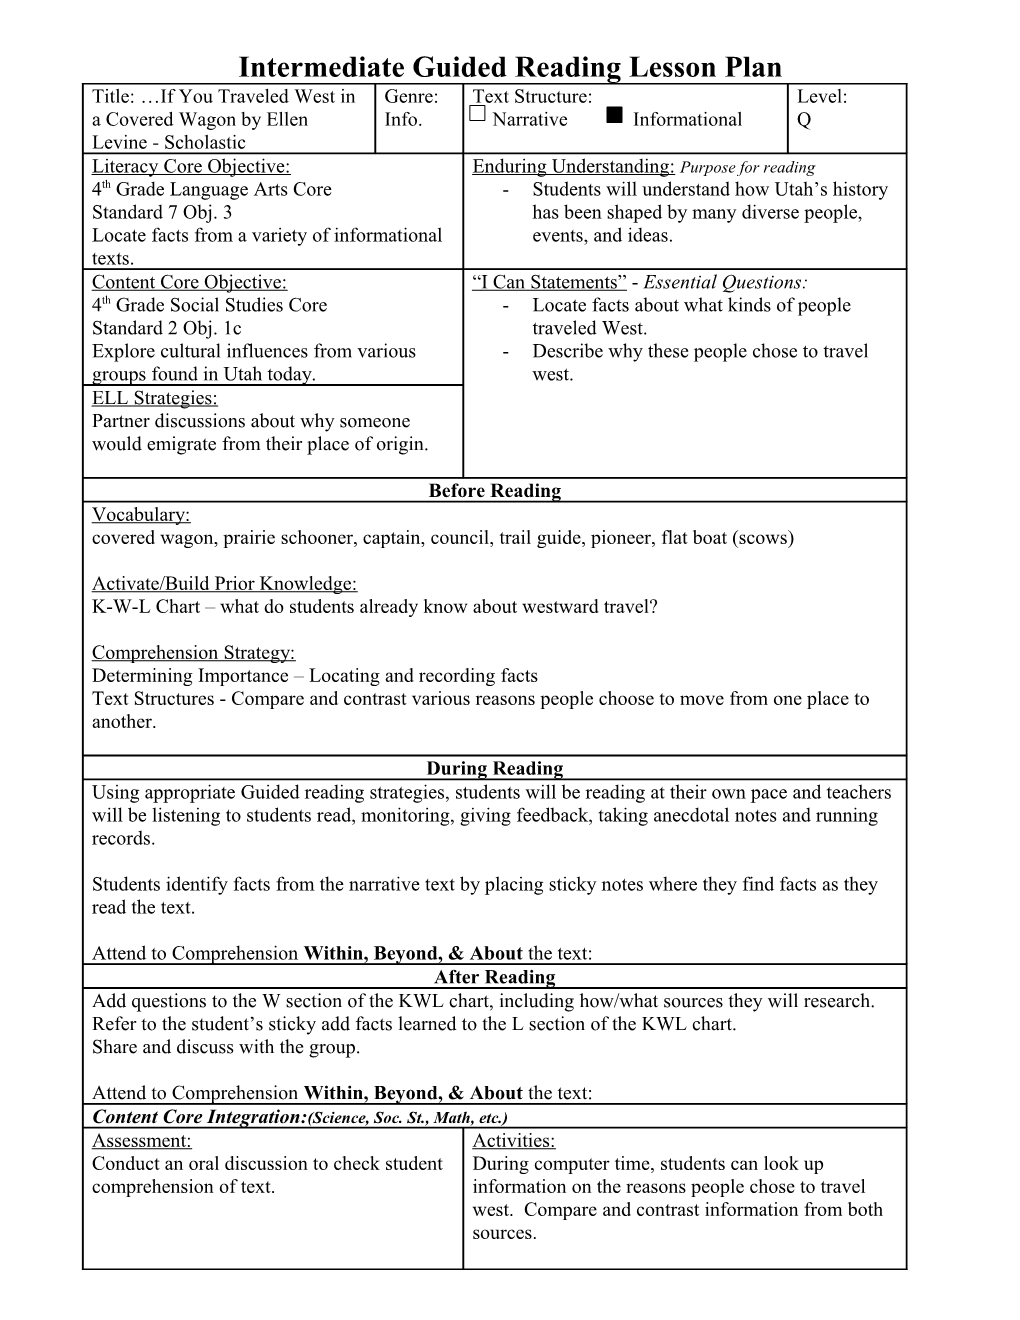 Intermediate Guided Reading Lesson Plan s2